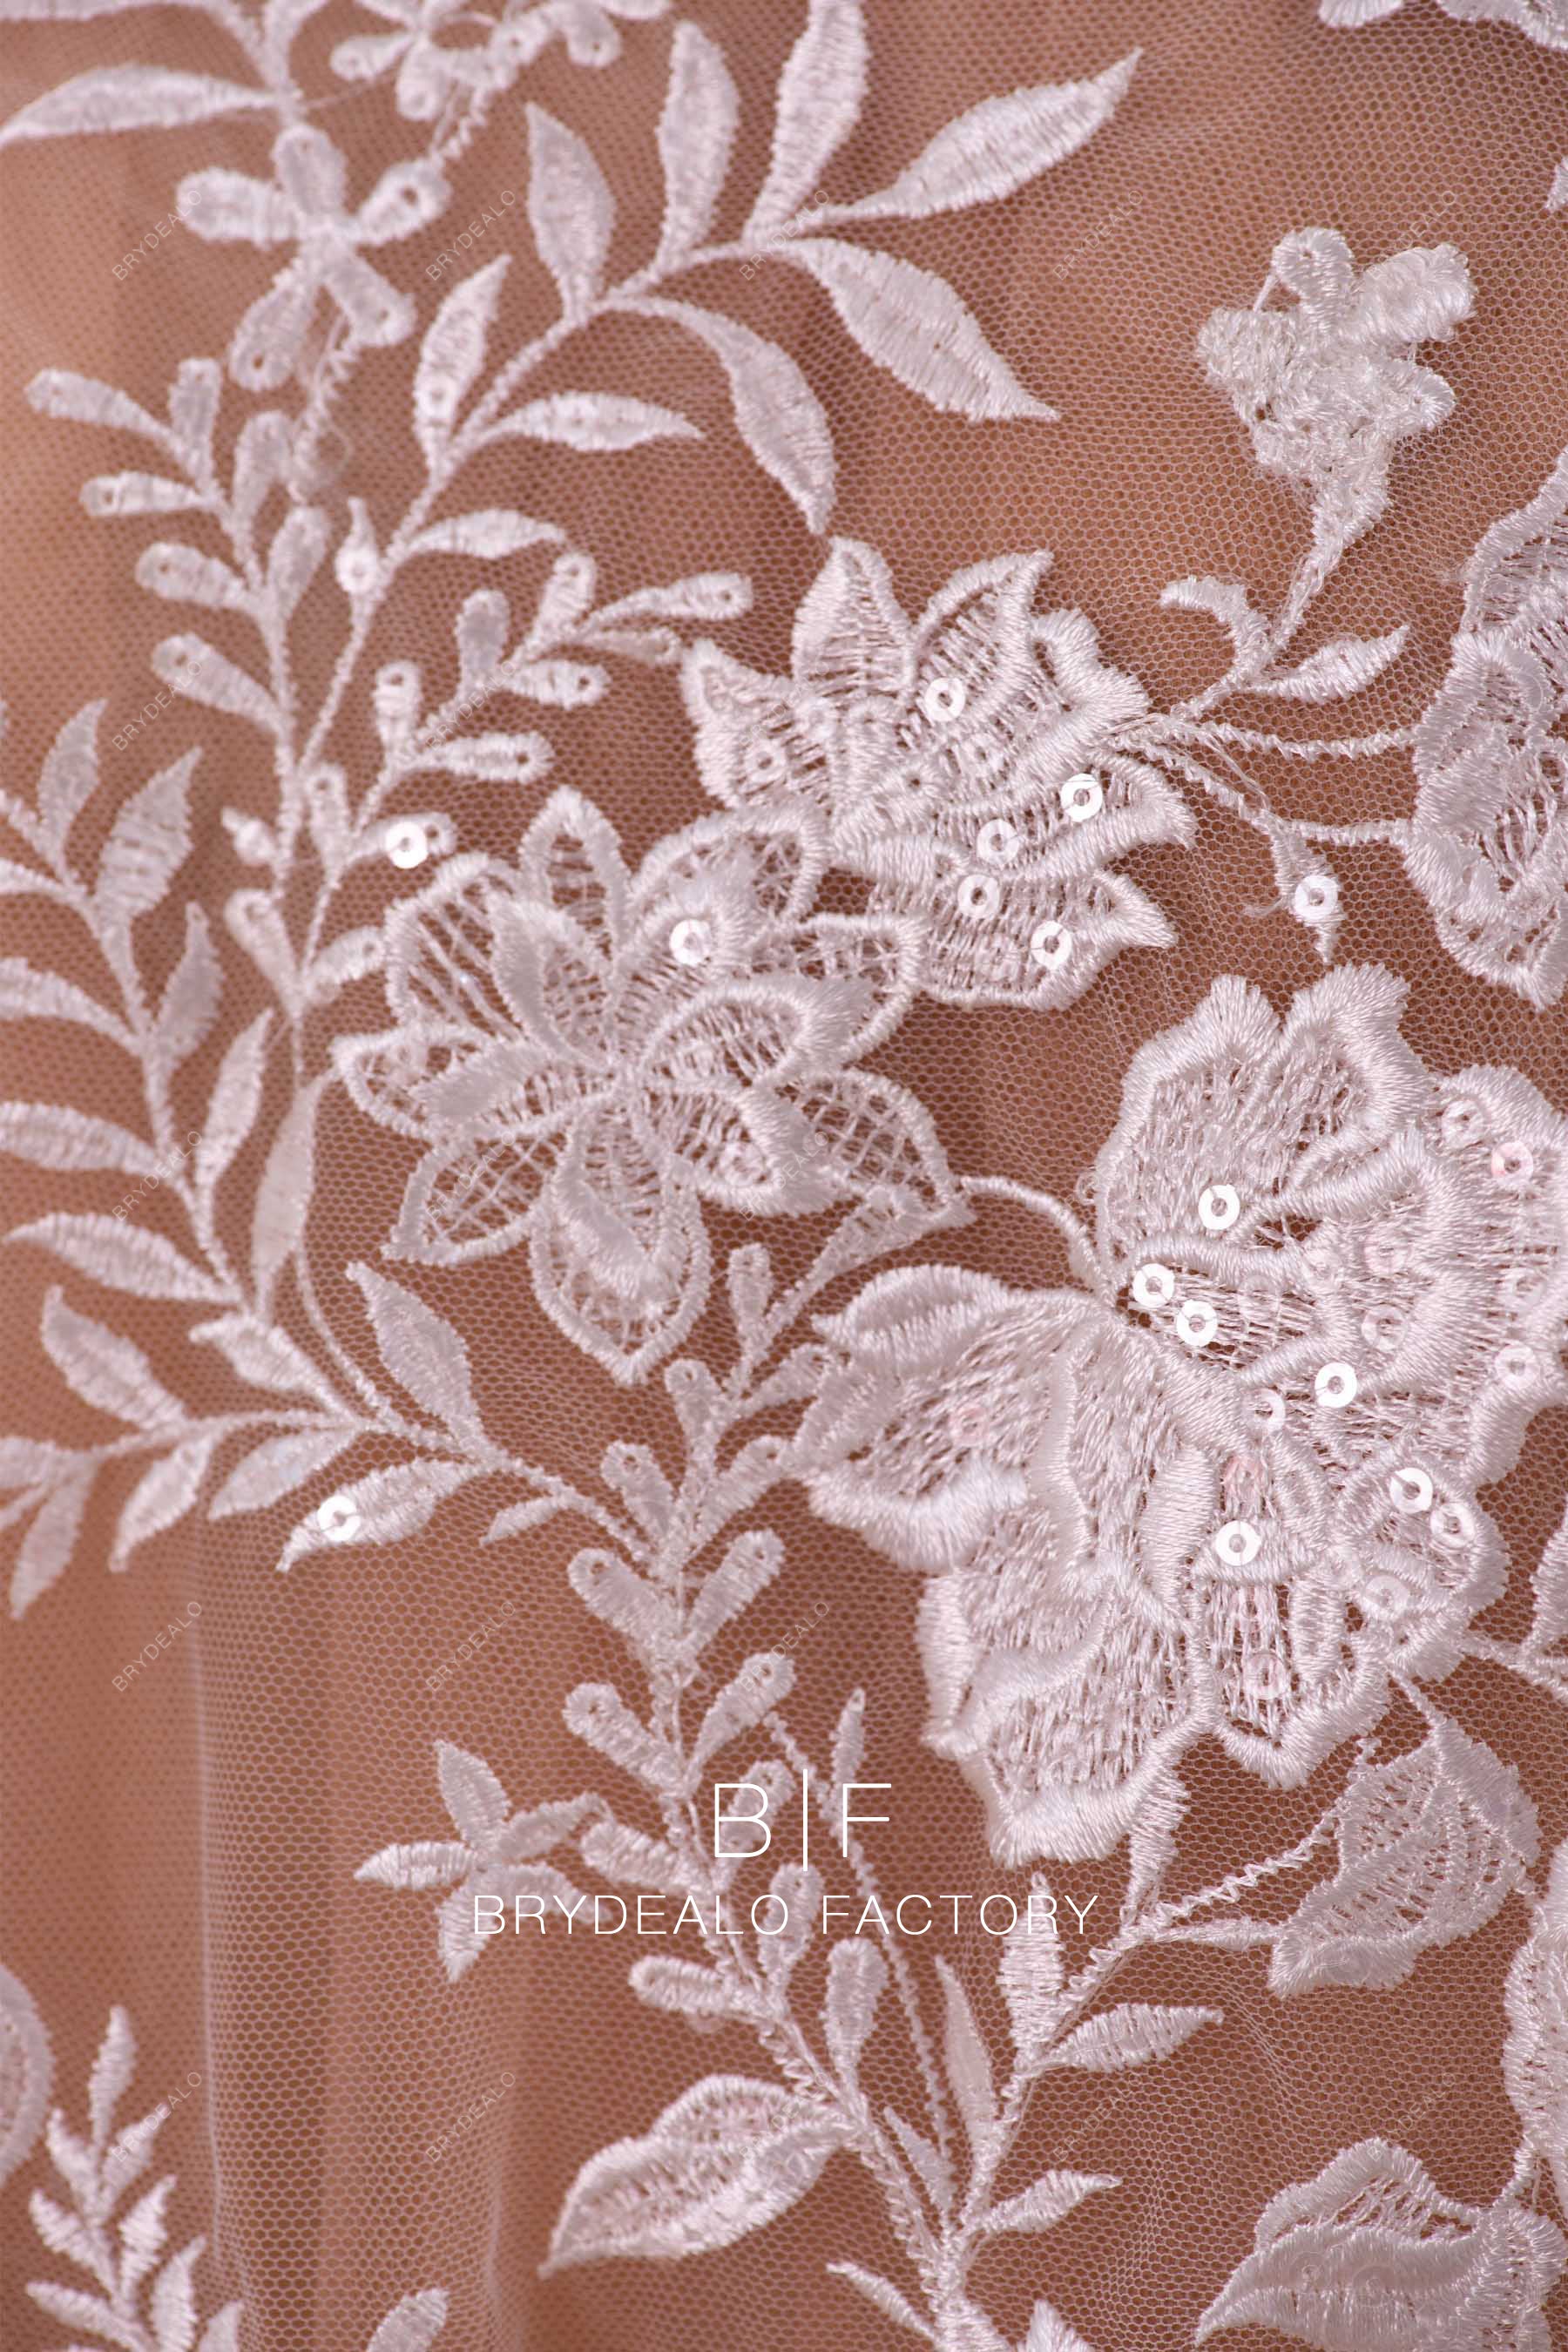  Shimmery Embroidery Floral Lace